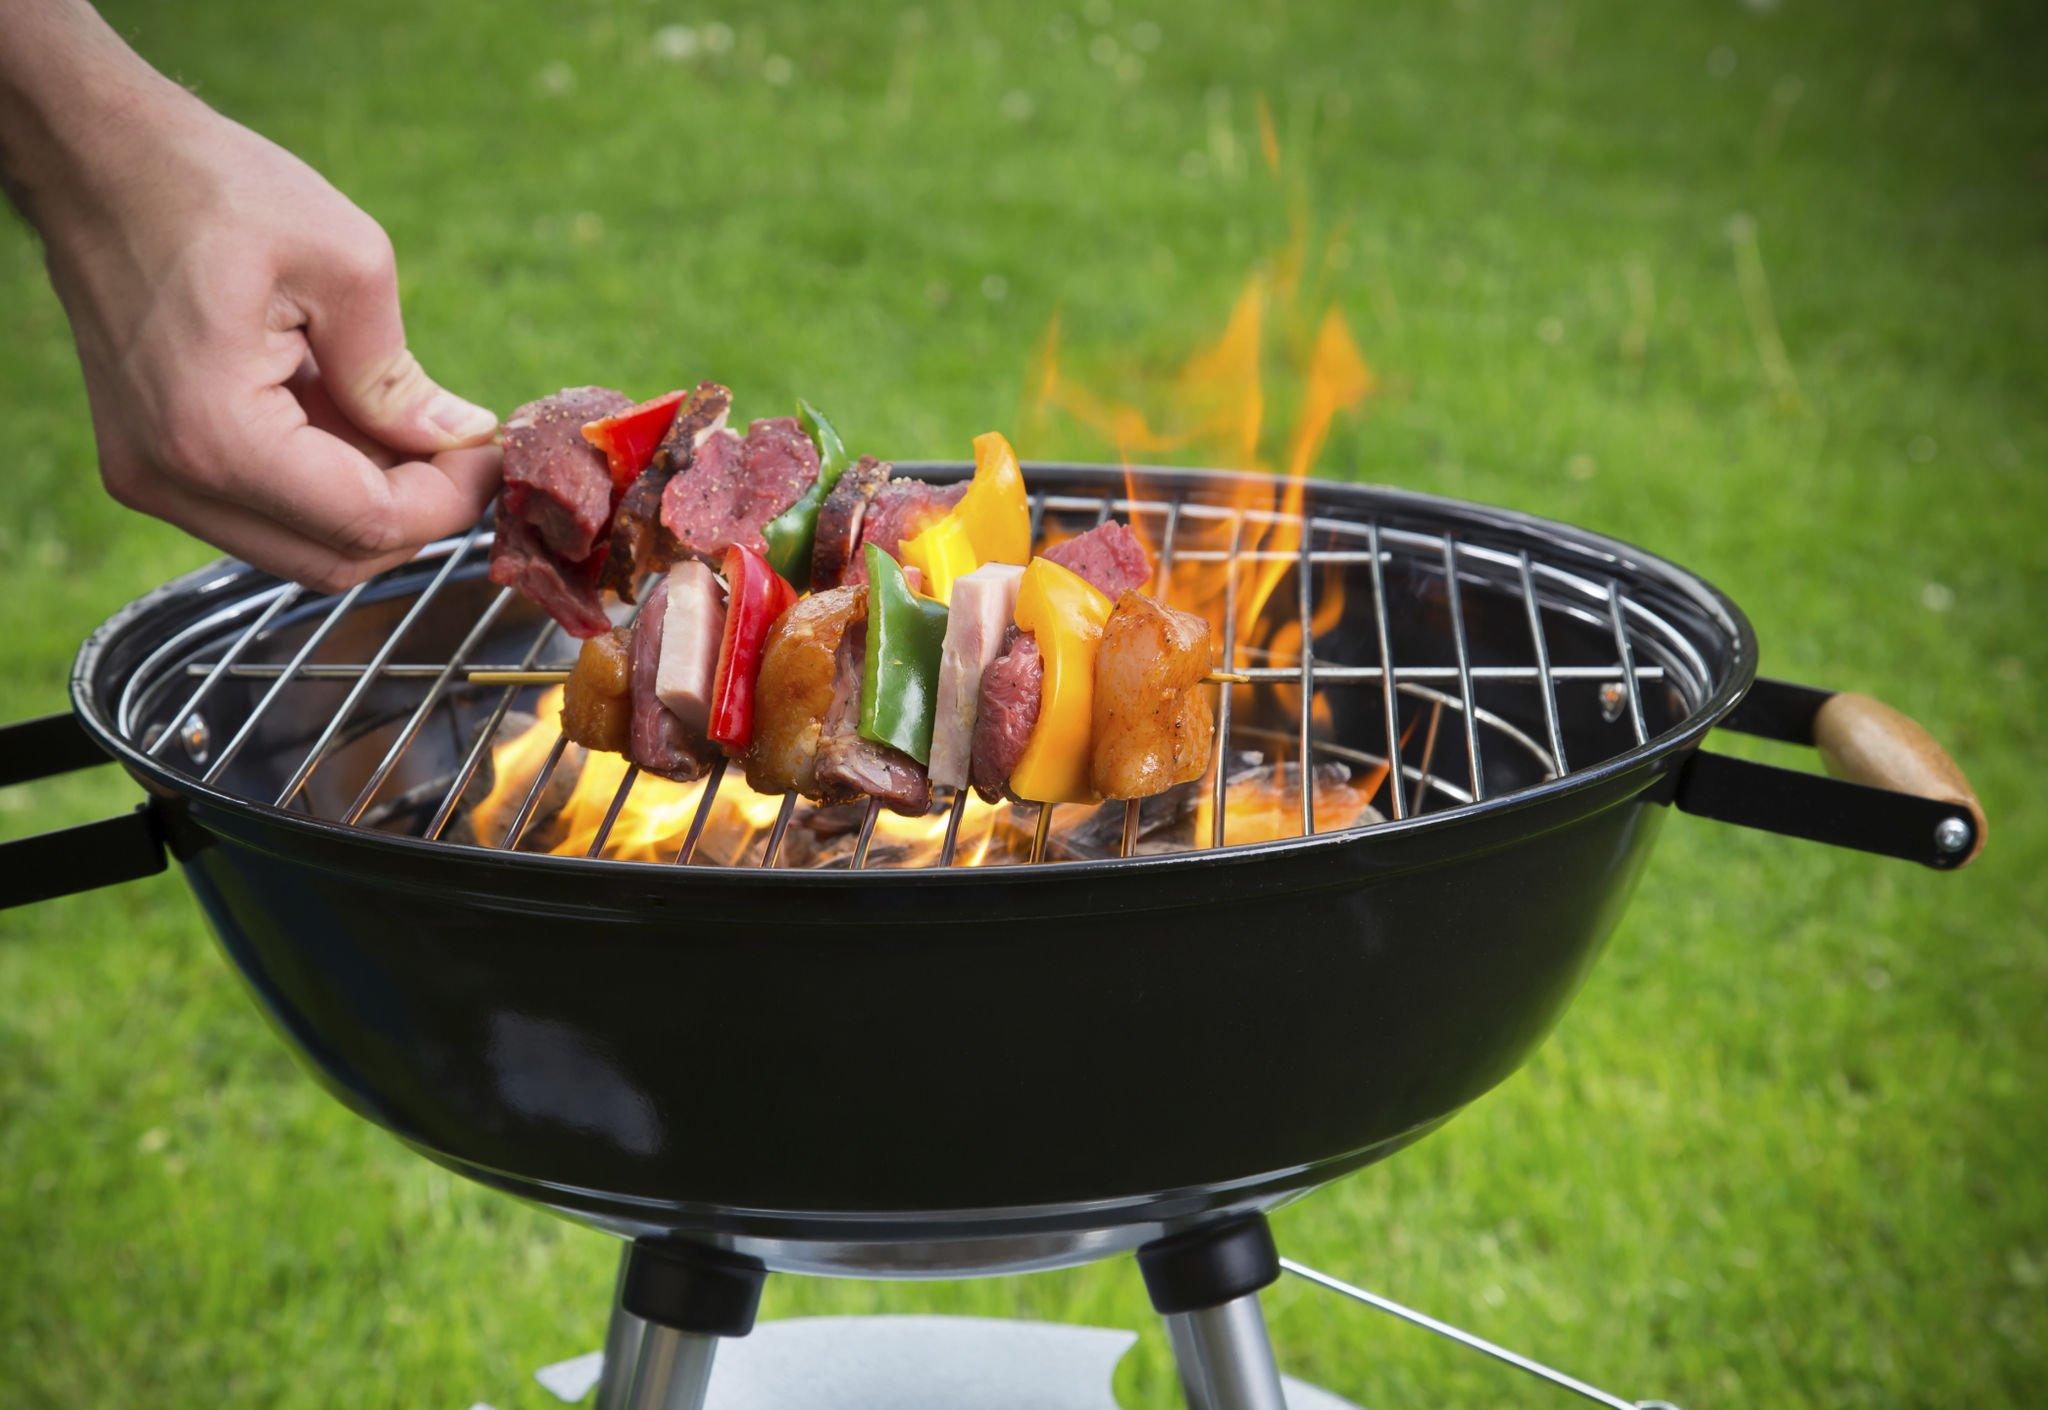 Buy MasterBuilt Portable Charcoal Grill from BBQs 2u for Outdoor Grilling Experience